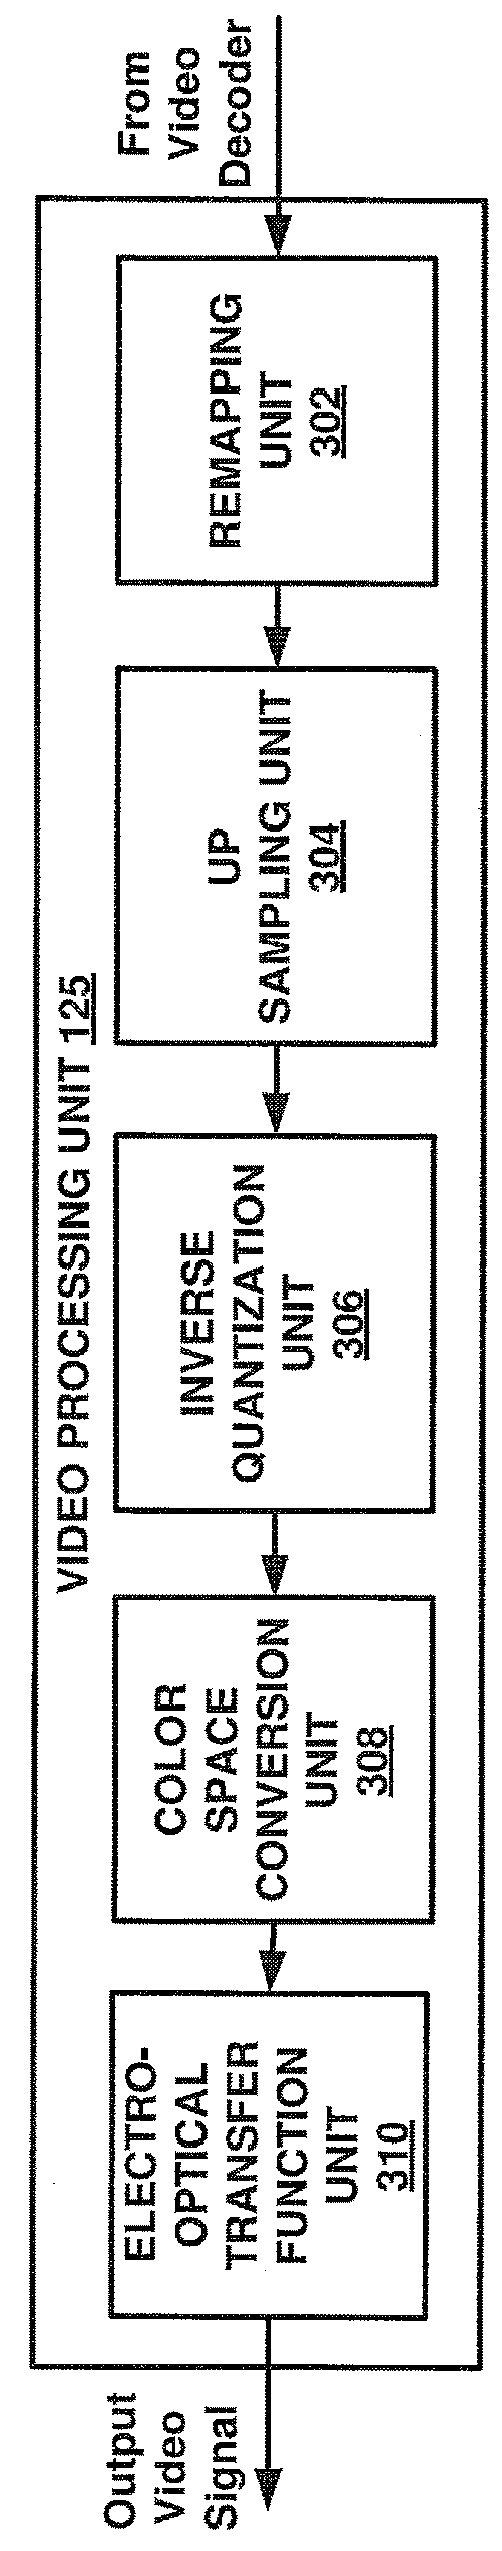 Systems and methods for optimizing video coding based on a luminance transfer function or video color component values